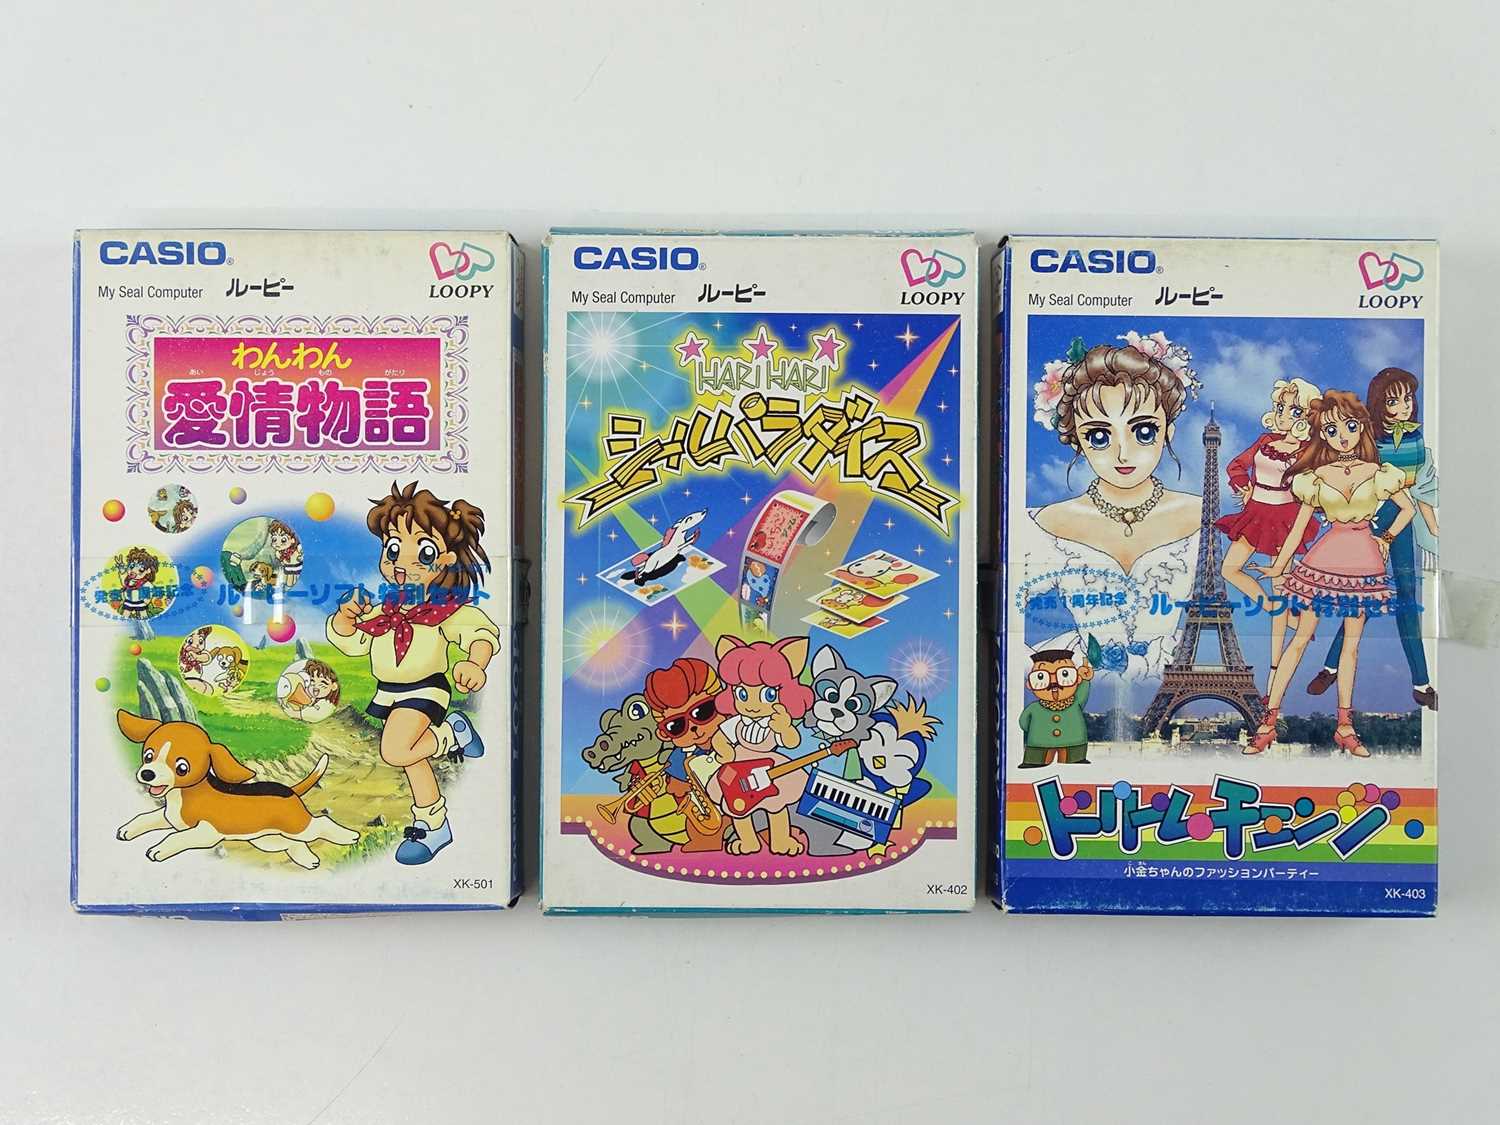 Casio Loopy My Seal Computer games - Bow-wow Puppy Love Story, HARIHARI Seal Paradise, and Dream